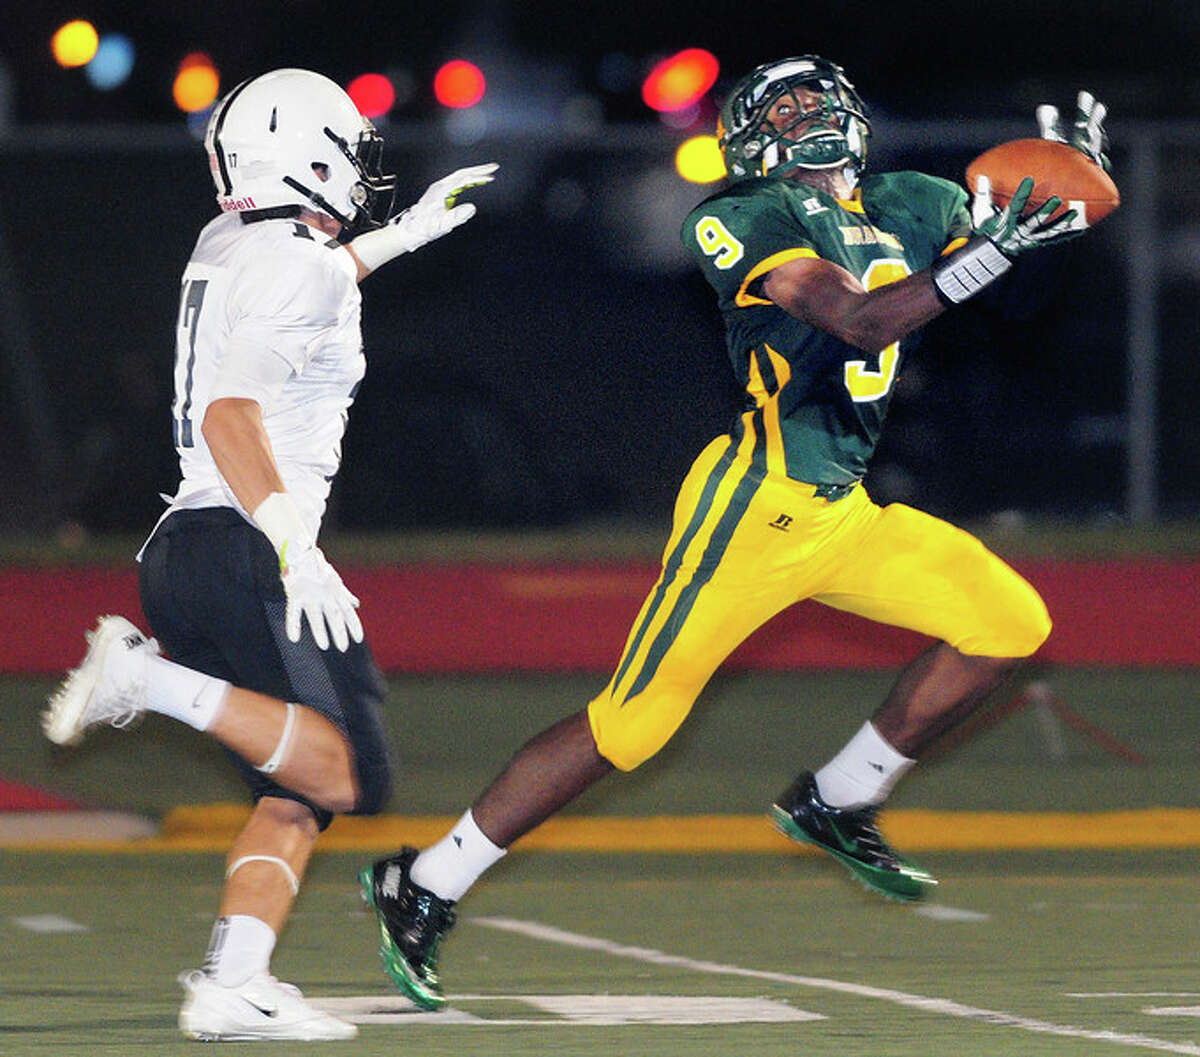 Nathan McCary (right) of Hamden intercepts a pass intended for Noah Palo (left) at the end of the first half on 9/27/2013. Photo by Arnold Gold/New Haven Register